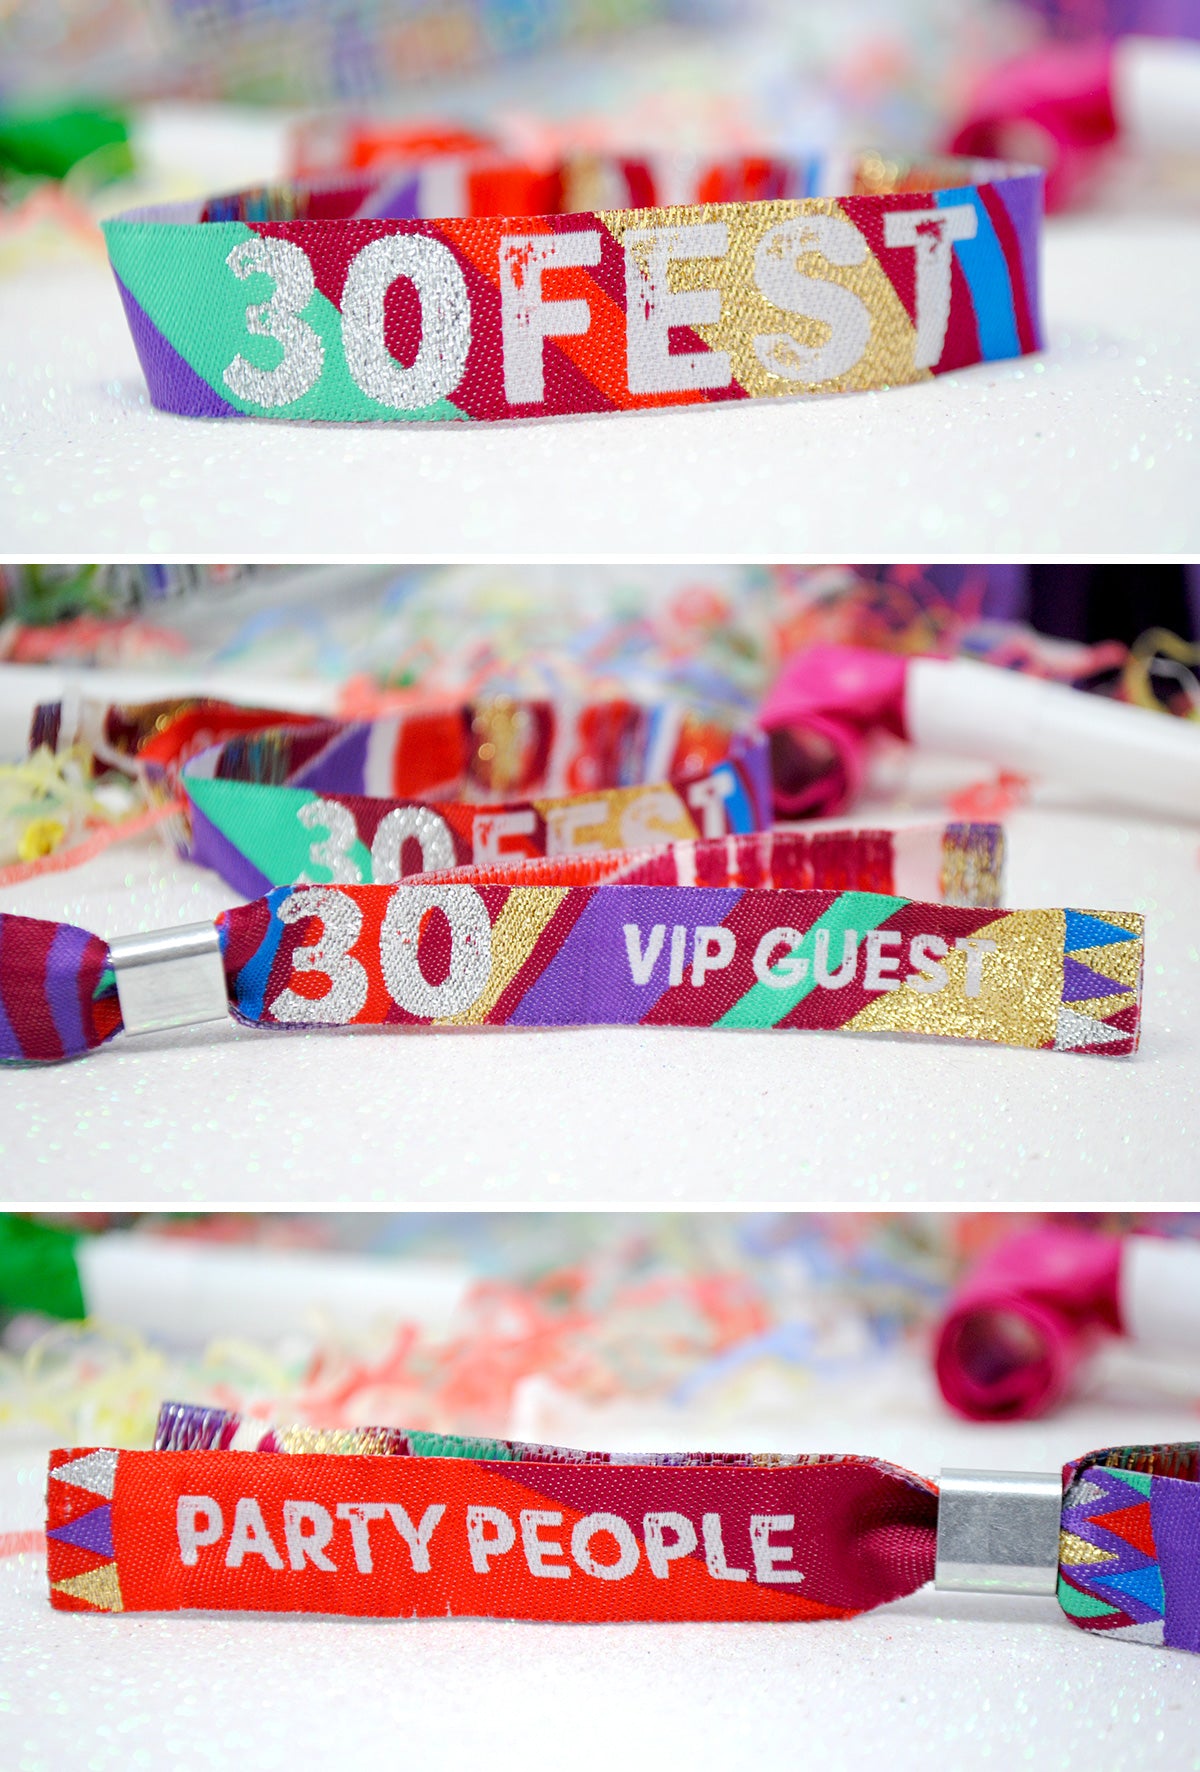 30FEST 30th birthday party festival wristbands